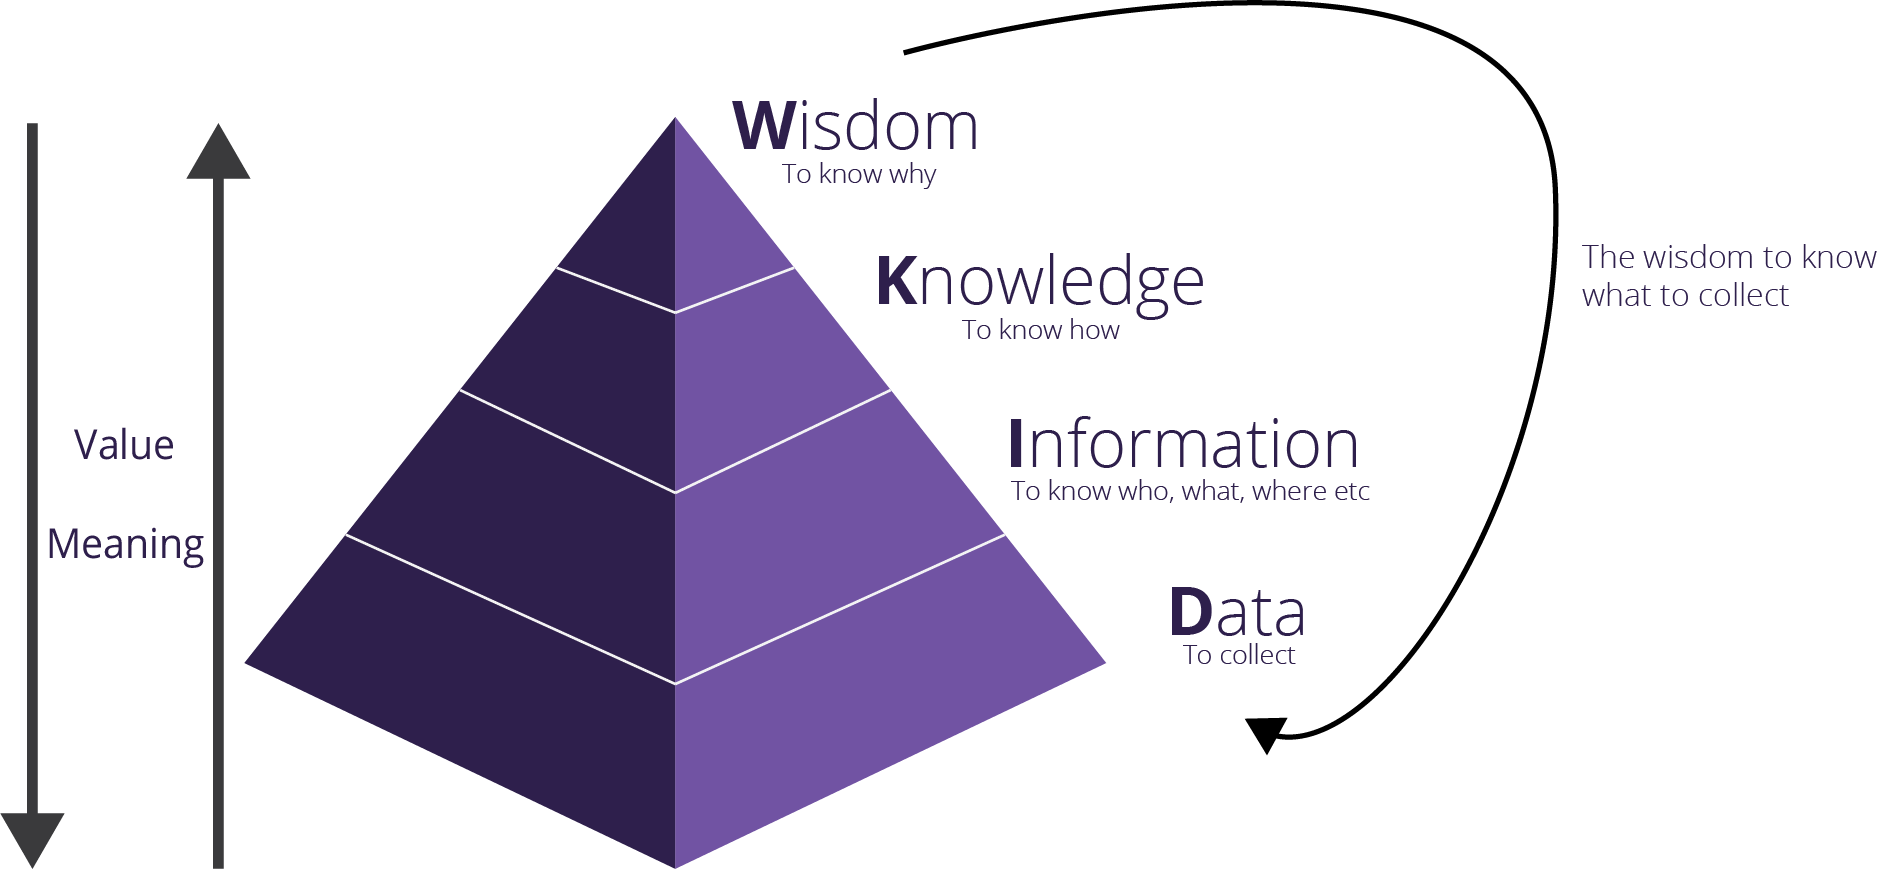 Diagram of the DIKW Pyramid with text of Wisdom, Knowledge, Information & Data.